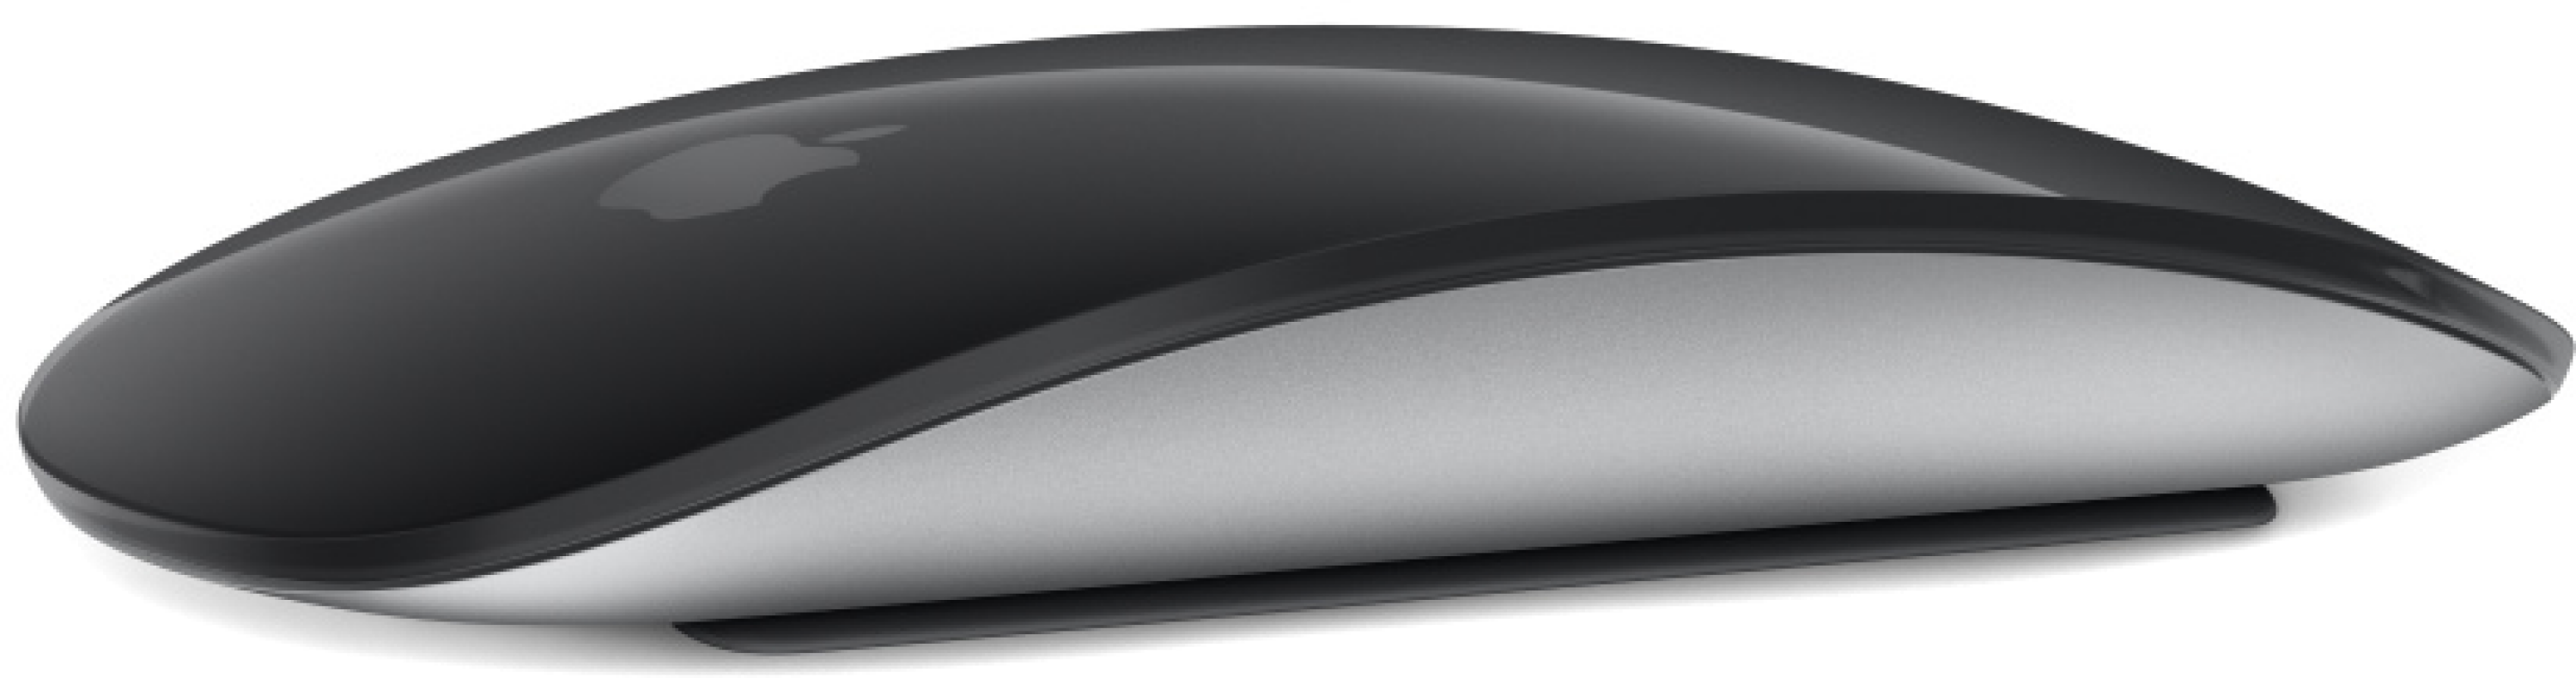 Apple Magic Mouse with USB-C - Black | Sweetwater